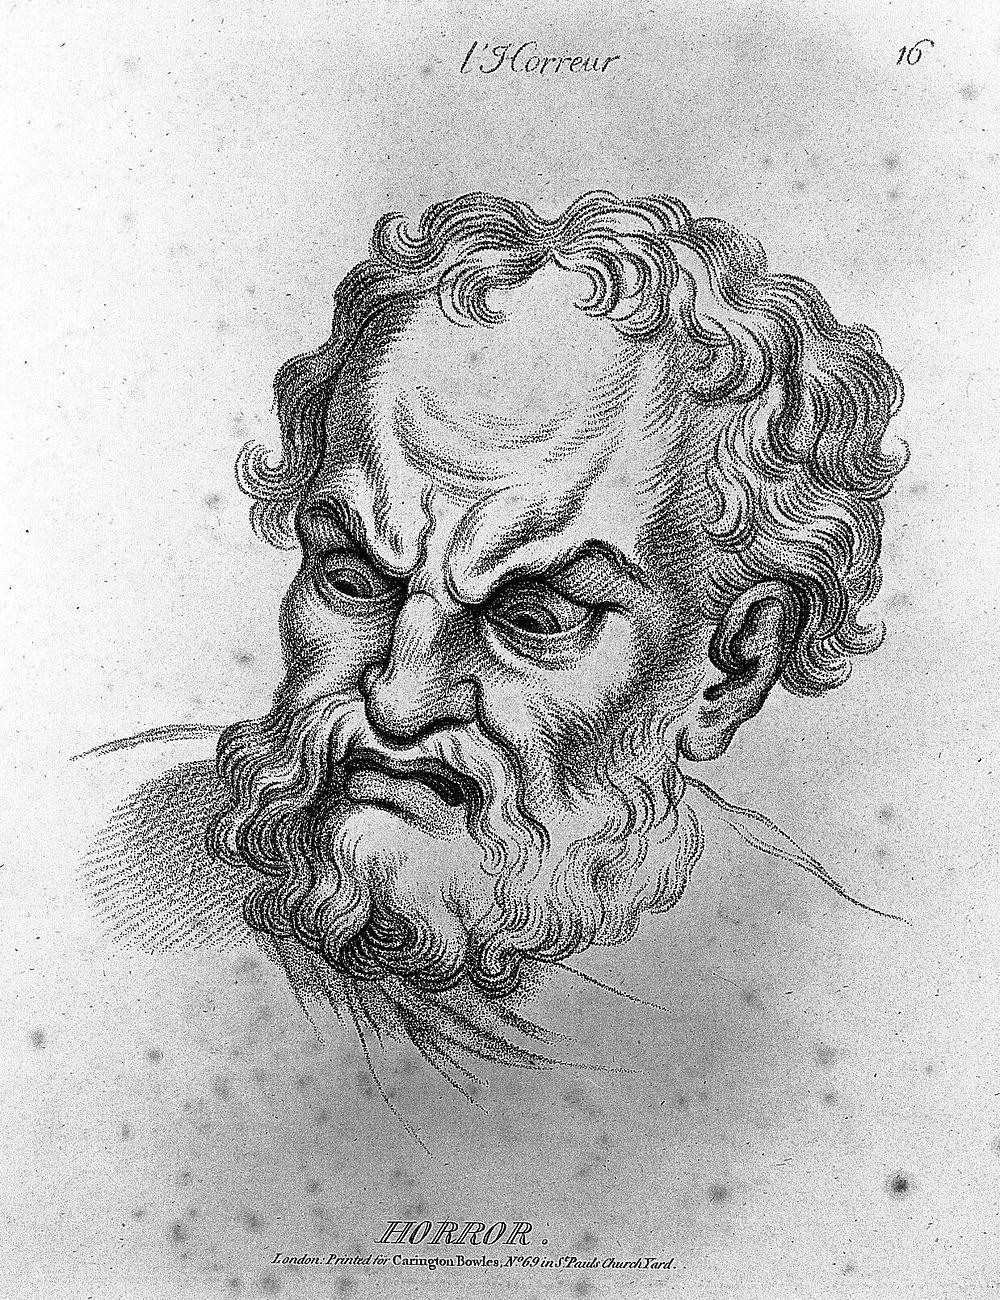 "Horror" from Le Brun, Bowles's Passions of the soul, circa 1785